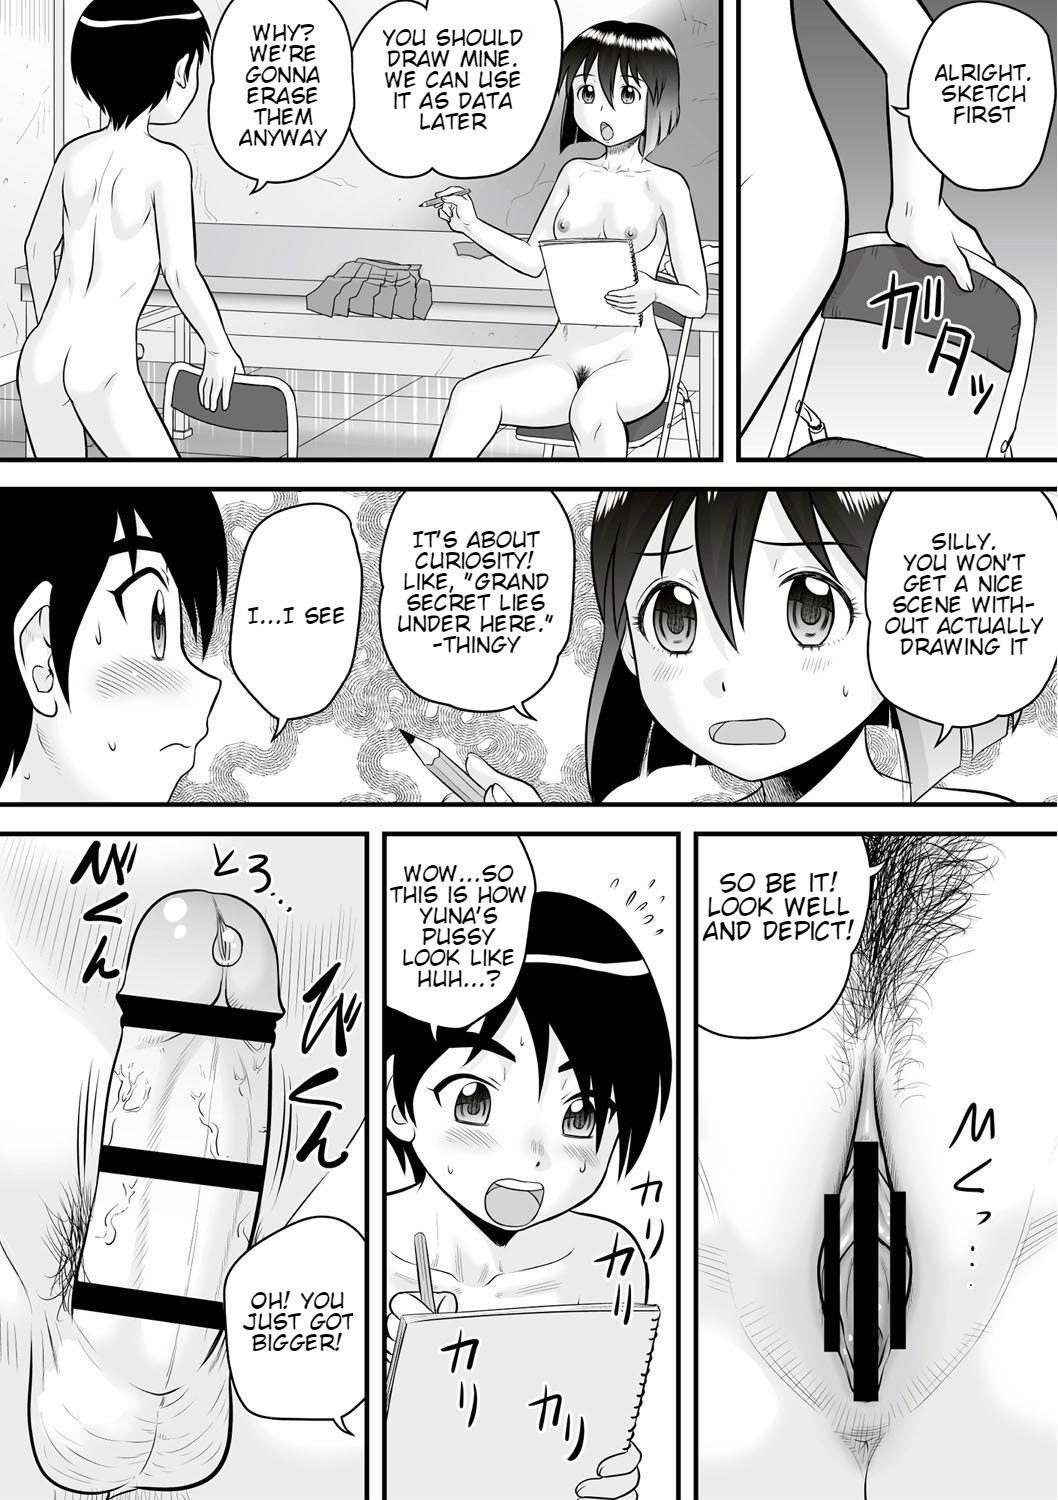 Screaming Tomodachi Sex | Friend Sex Best Blow Job Ever - Page 4